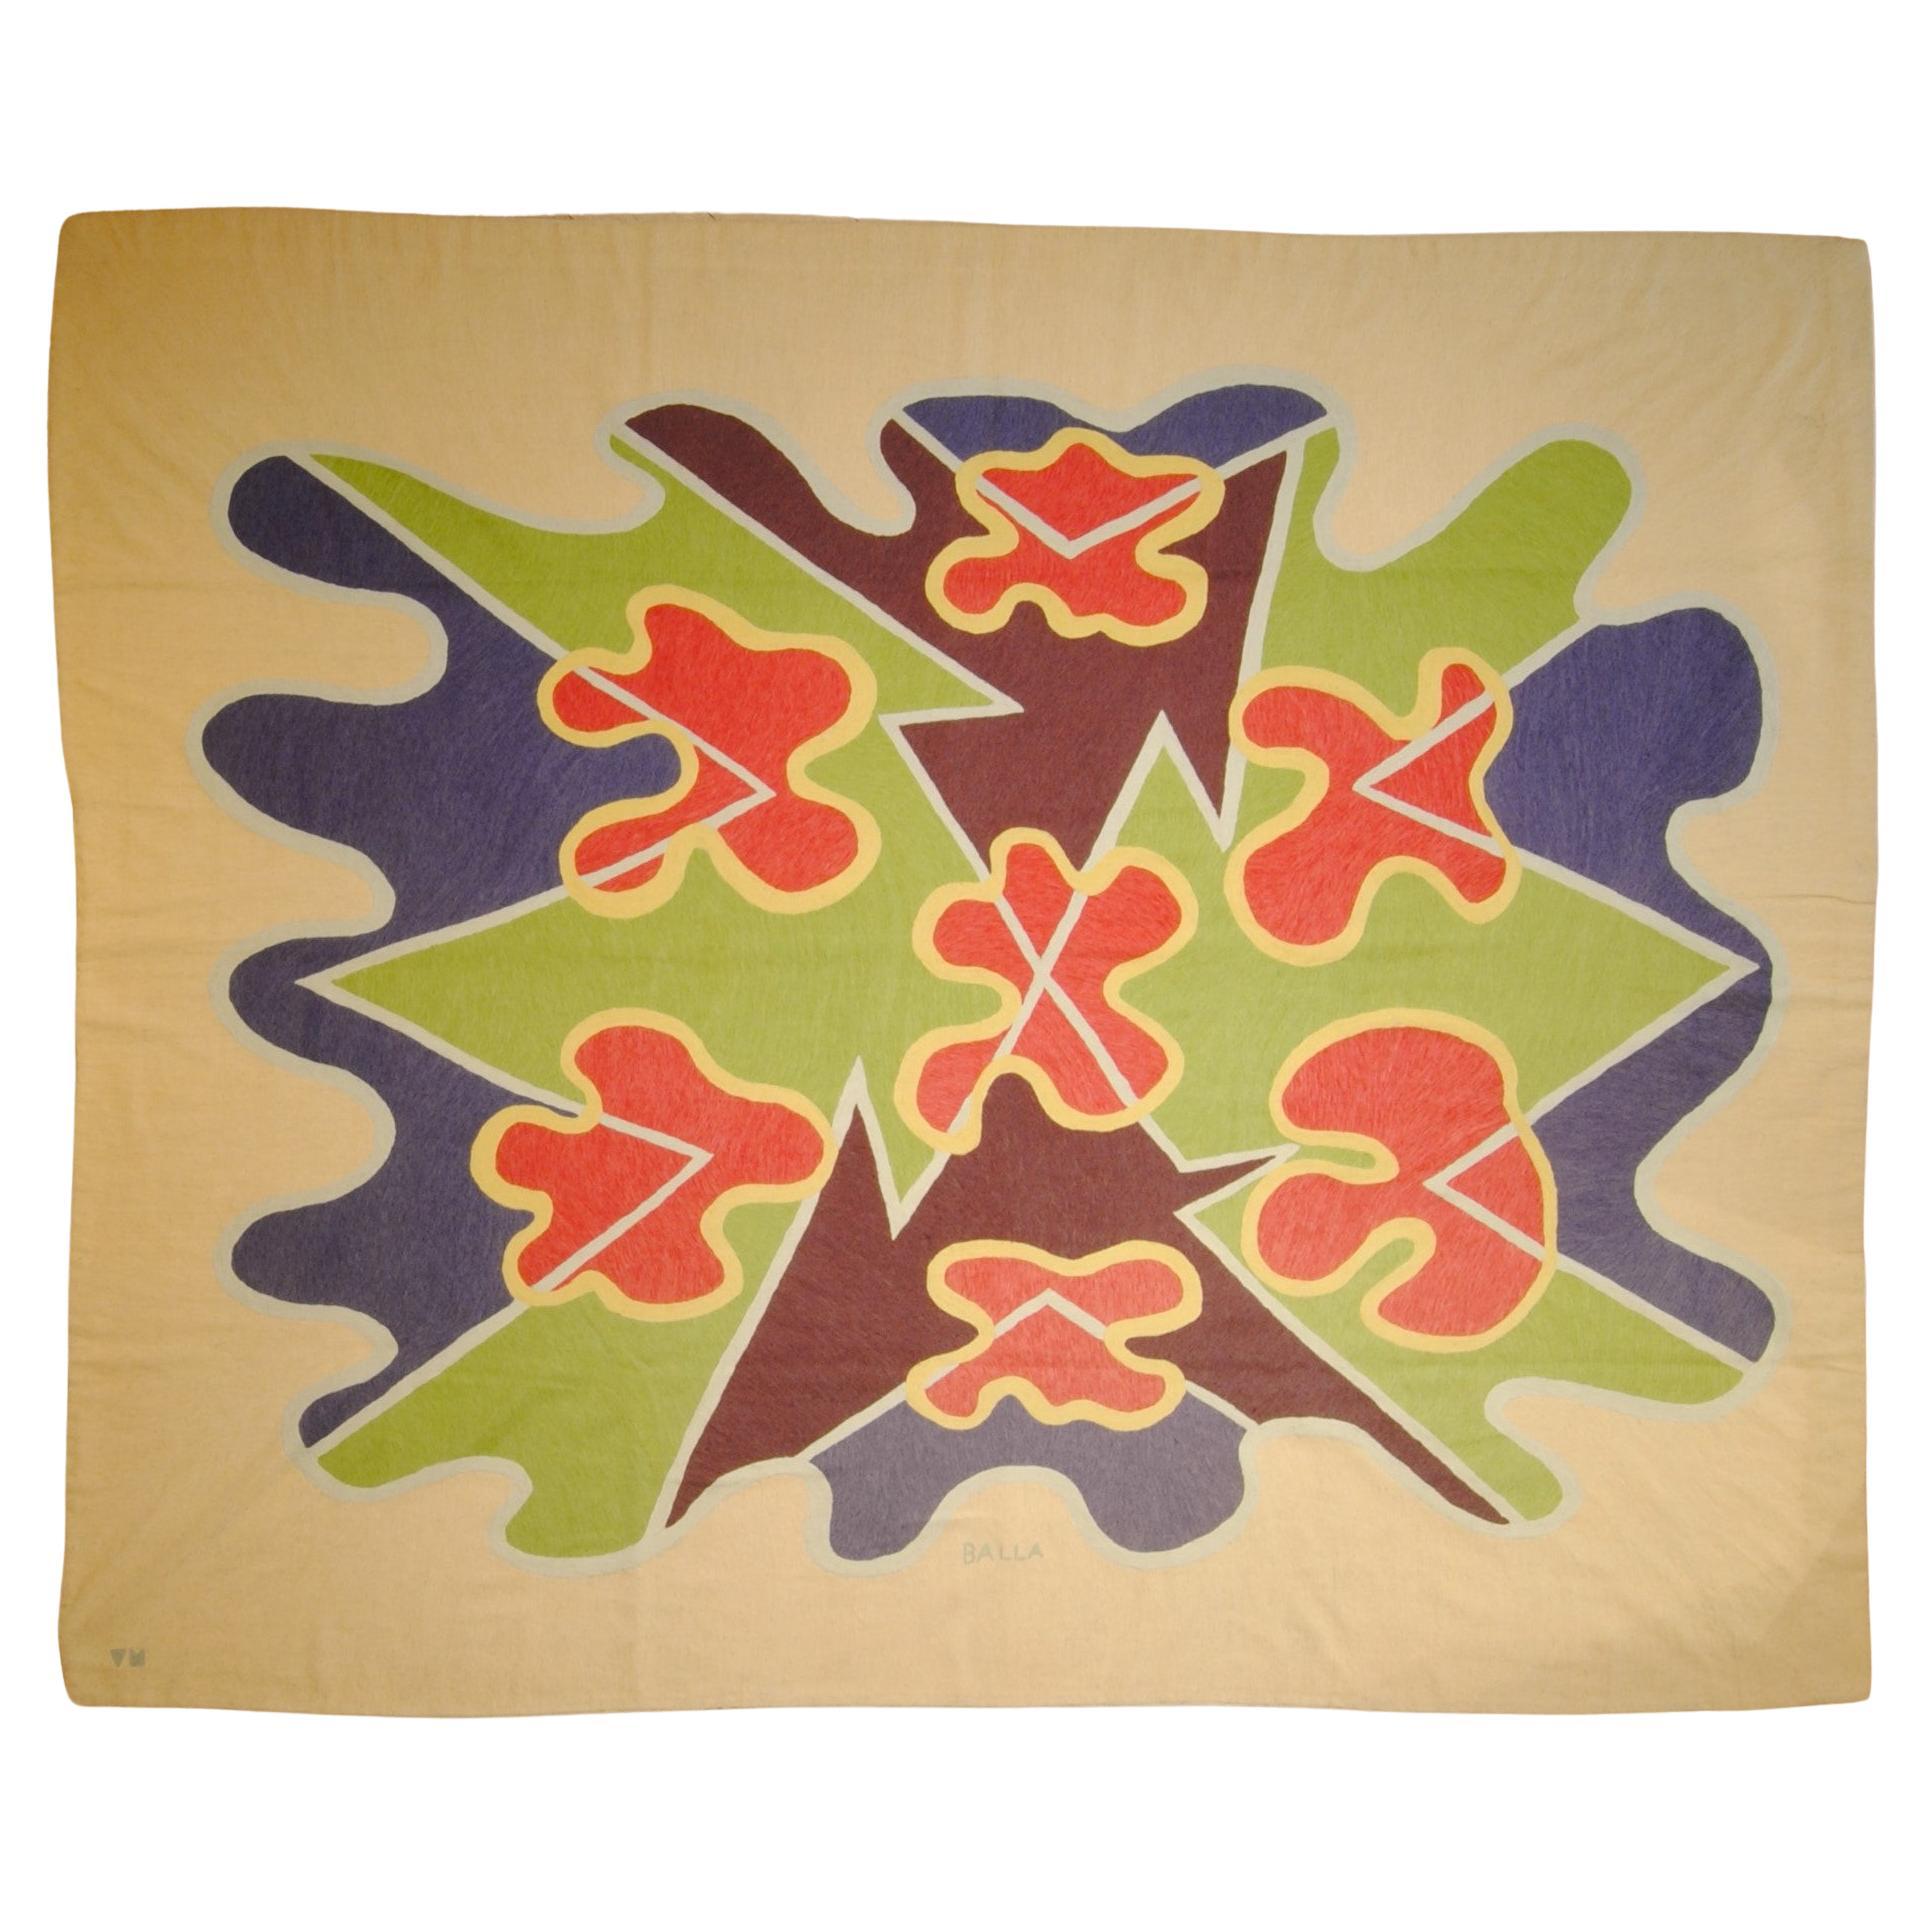 GIACOMO BALLA "FLOWERS + SPACE" Tapestry worked by hand in chain stitch  For Sale